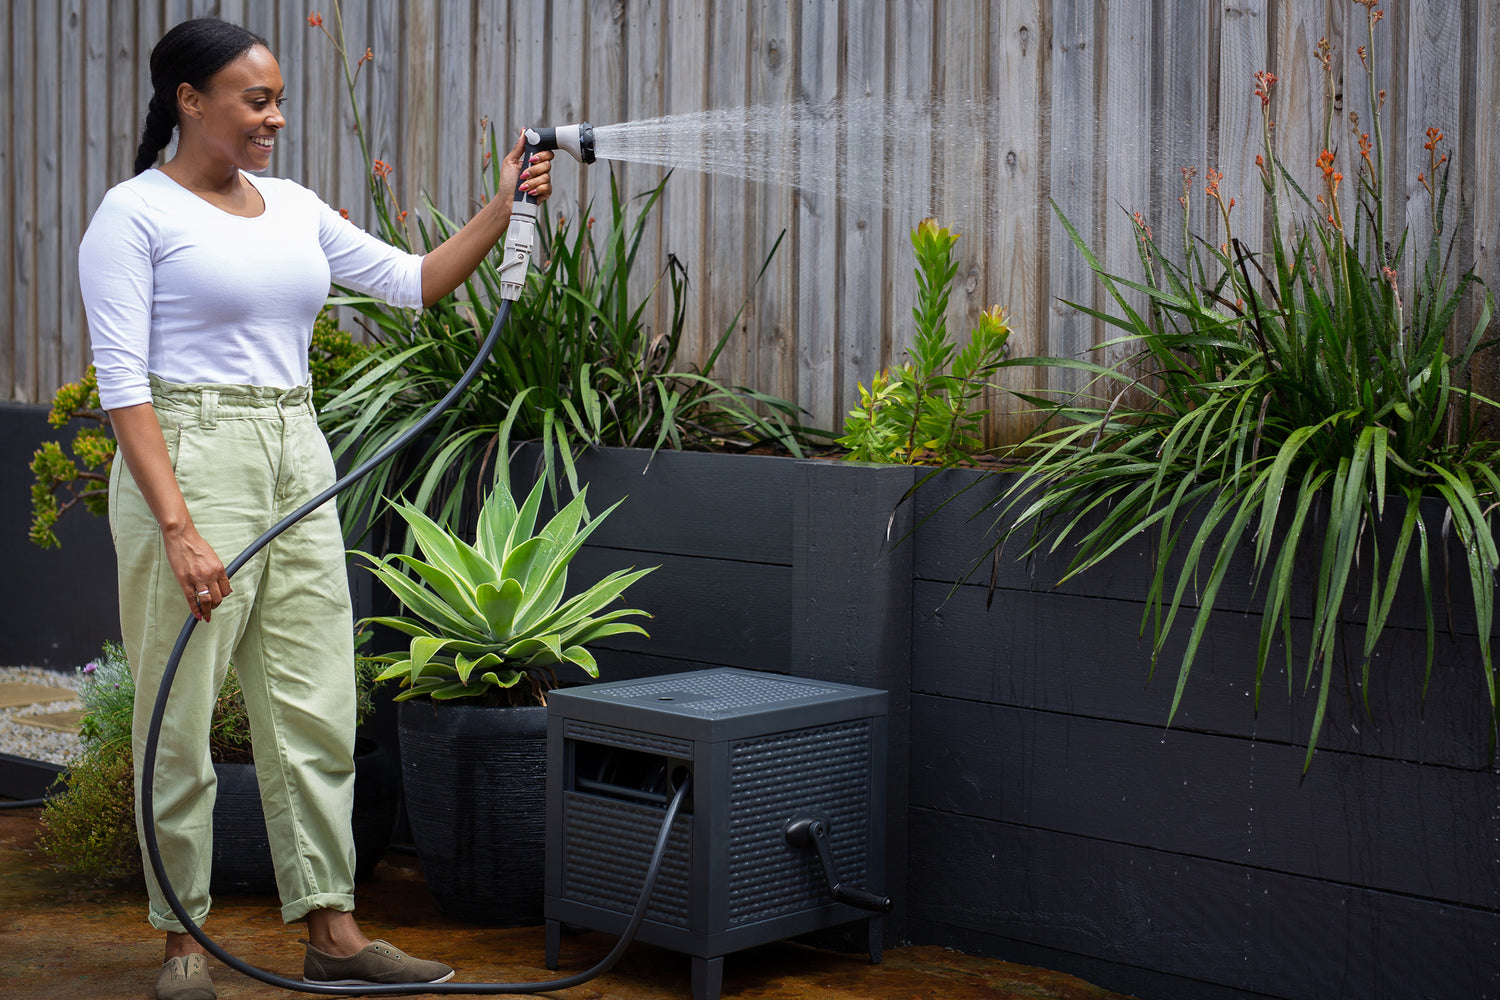 Woman Watering Her Plants With a Charcoal Metal Hose Reel Box